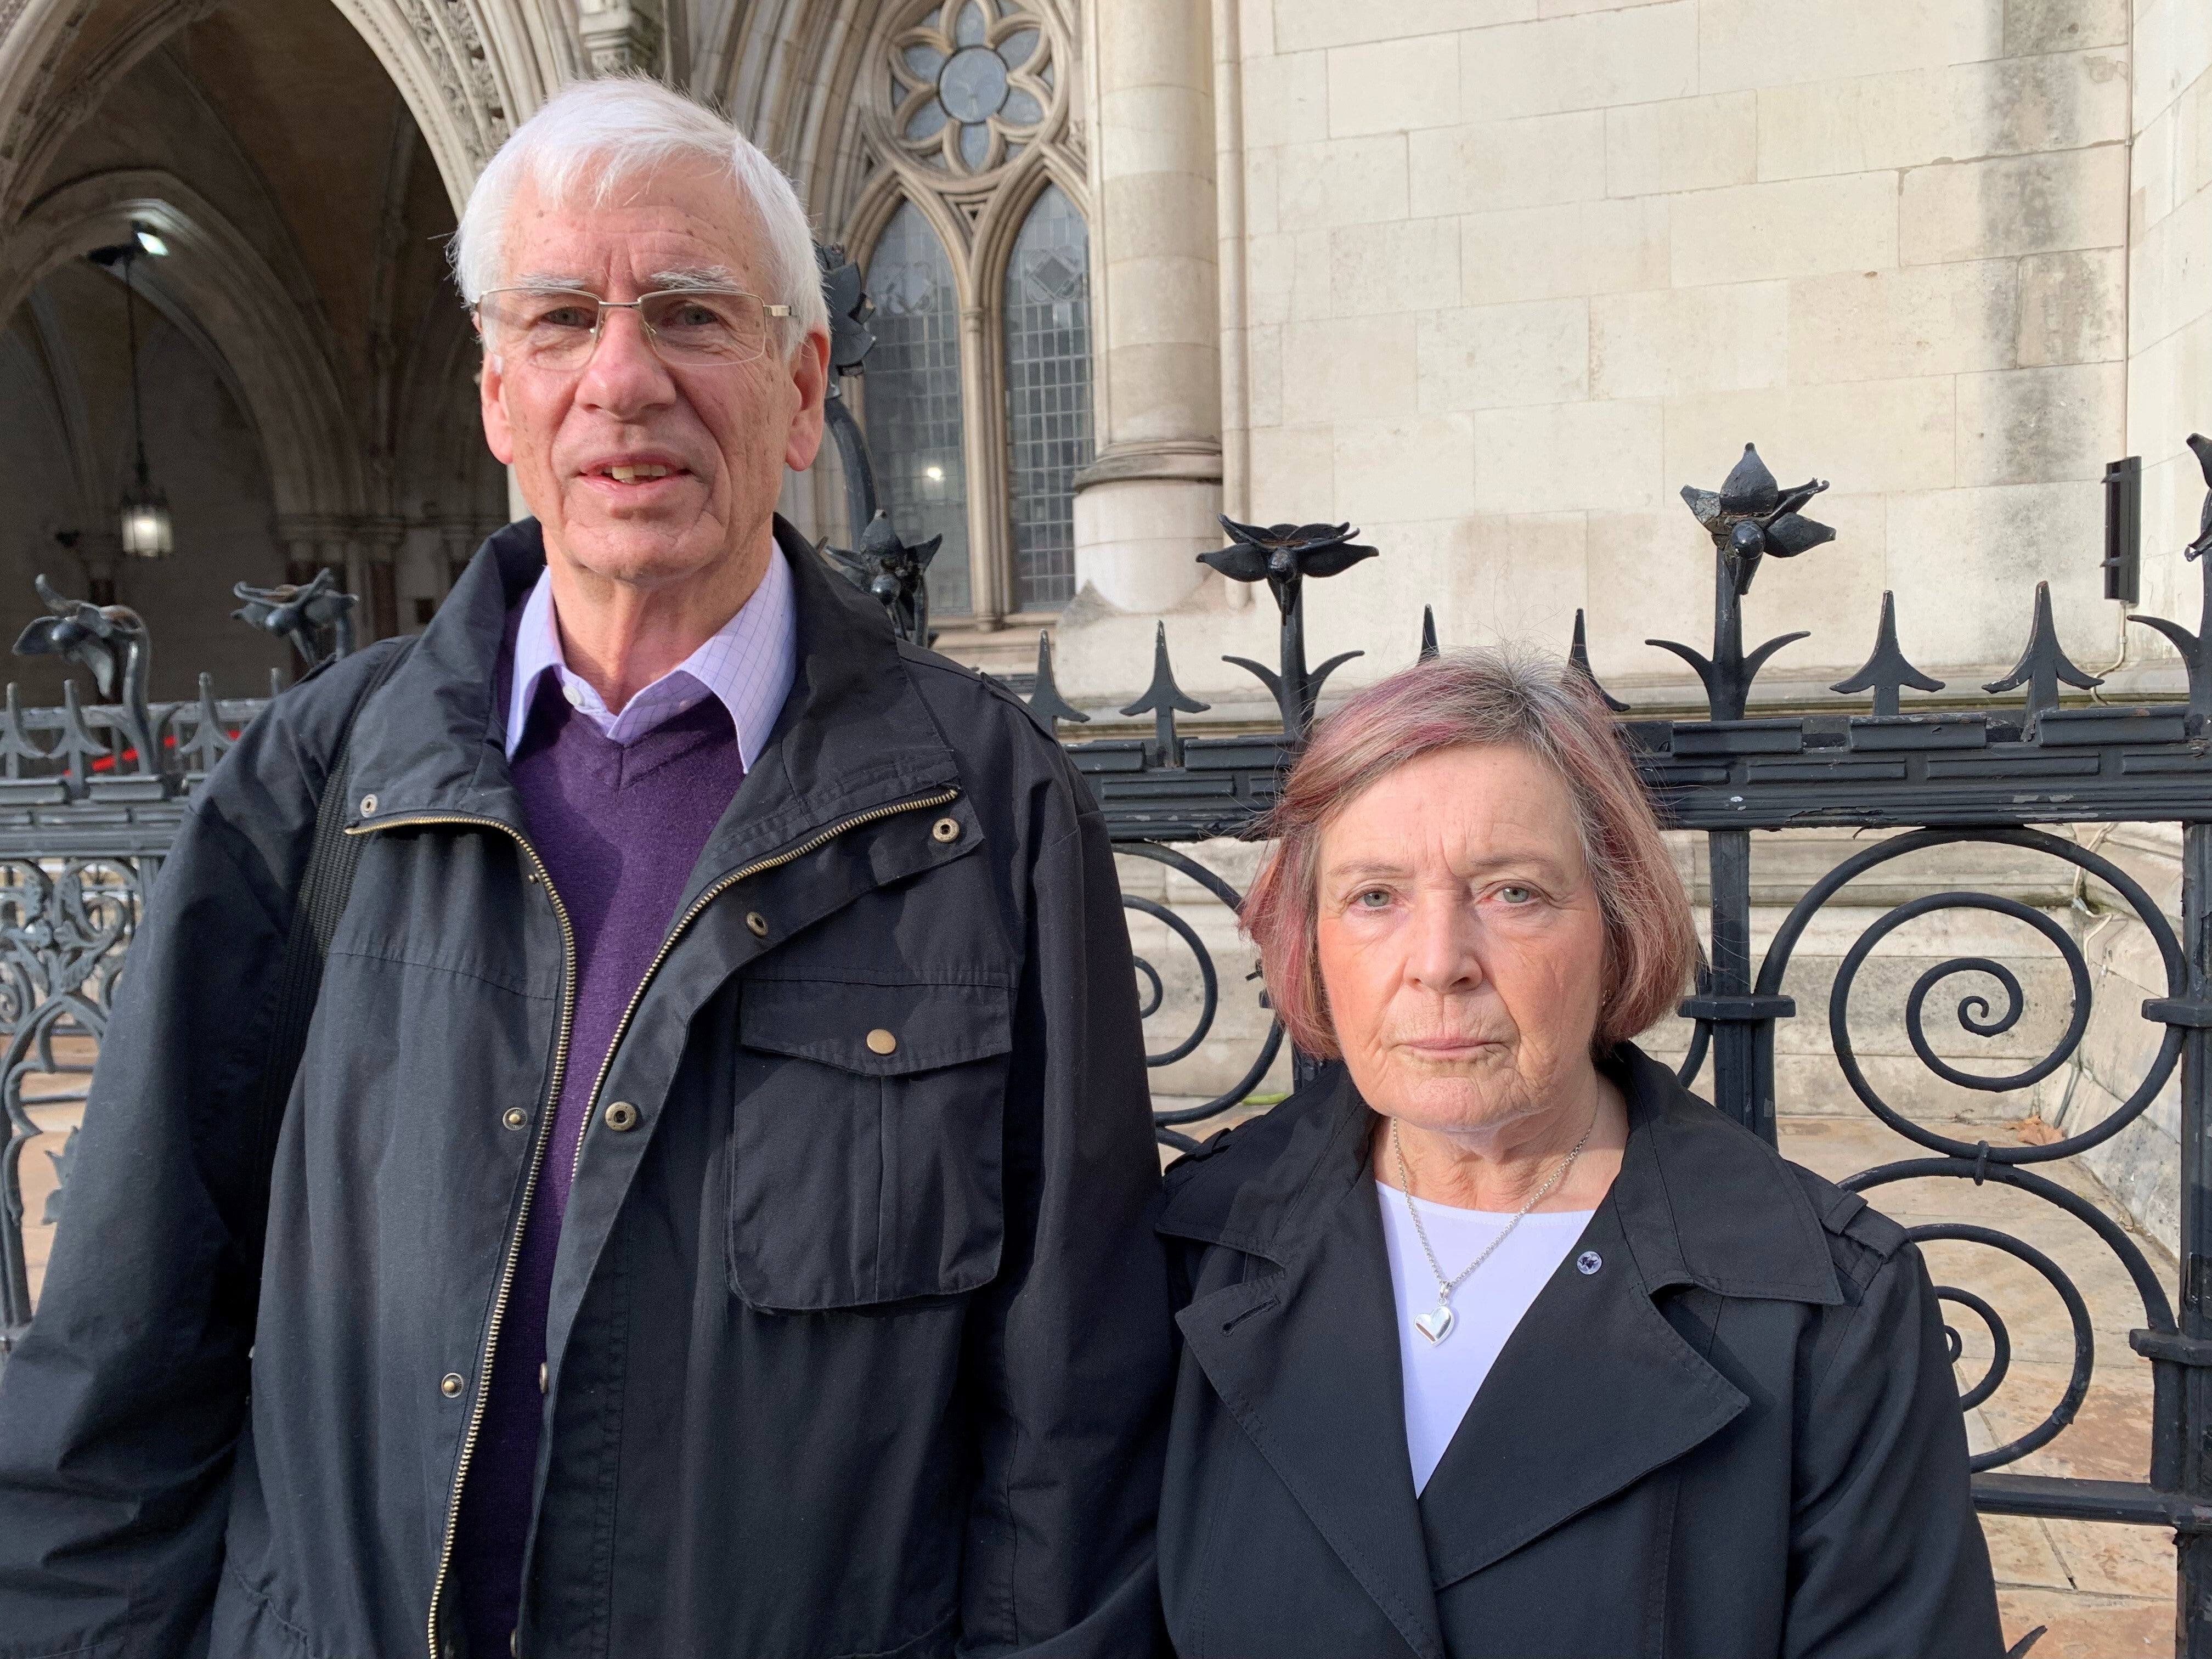 Andy and Angela Mays outside The Royal Courts of Justice last year (Tom Pilgrim/PA)